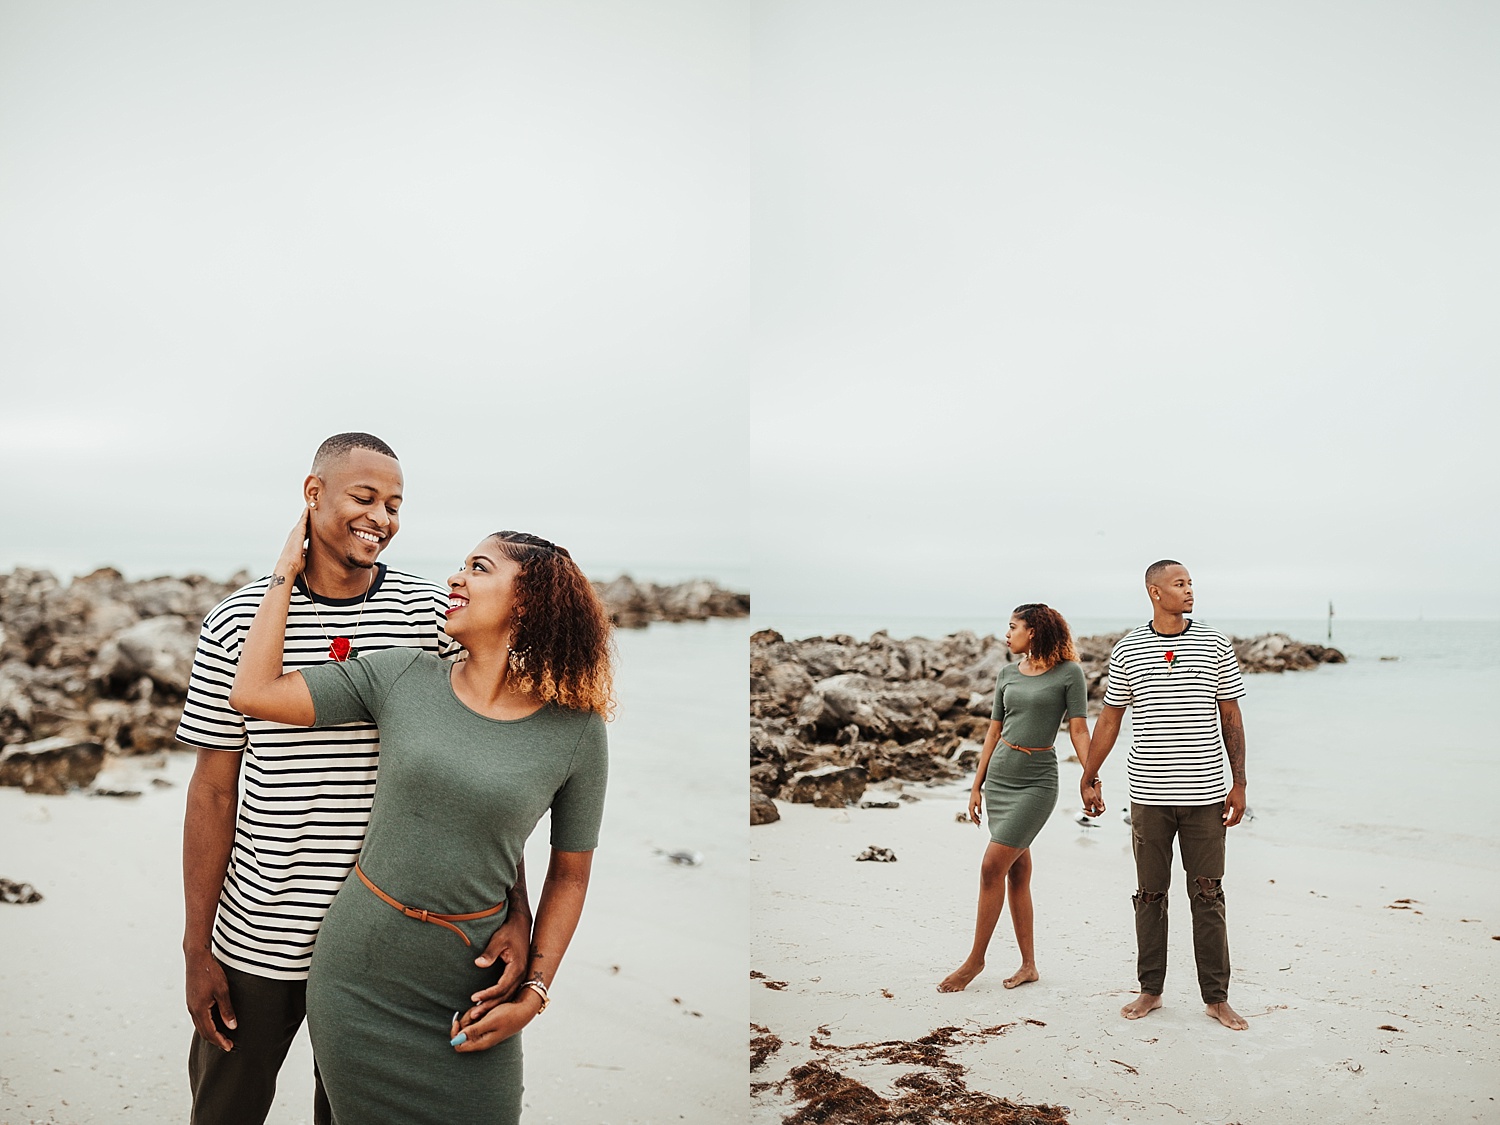 Clearwater Beach Couples Session, Clearwater Beach Engagement Photos, Clearwater Beach Engagement Photo Ideas, Ashley Izquierdo, Clearwater Beach, Tampa Wedding Photographers, Tampa Wedding Photographer, Tampa Engagement Photos, Tampa Photographer, Best Tampa Photographers 